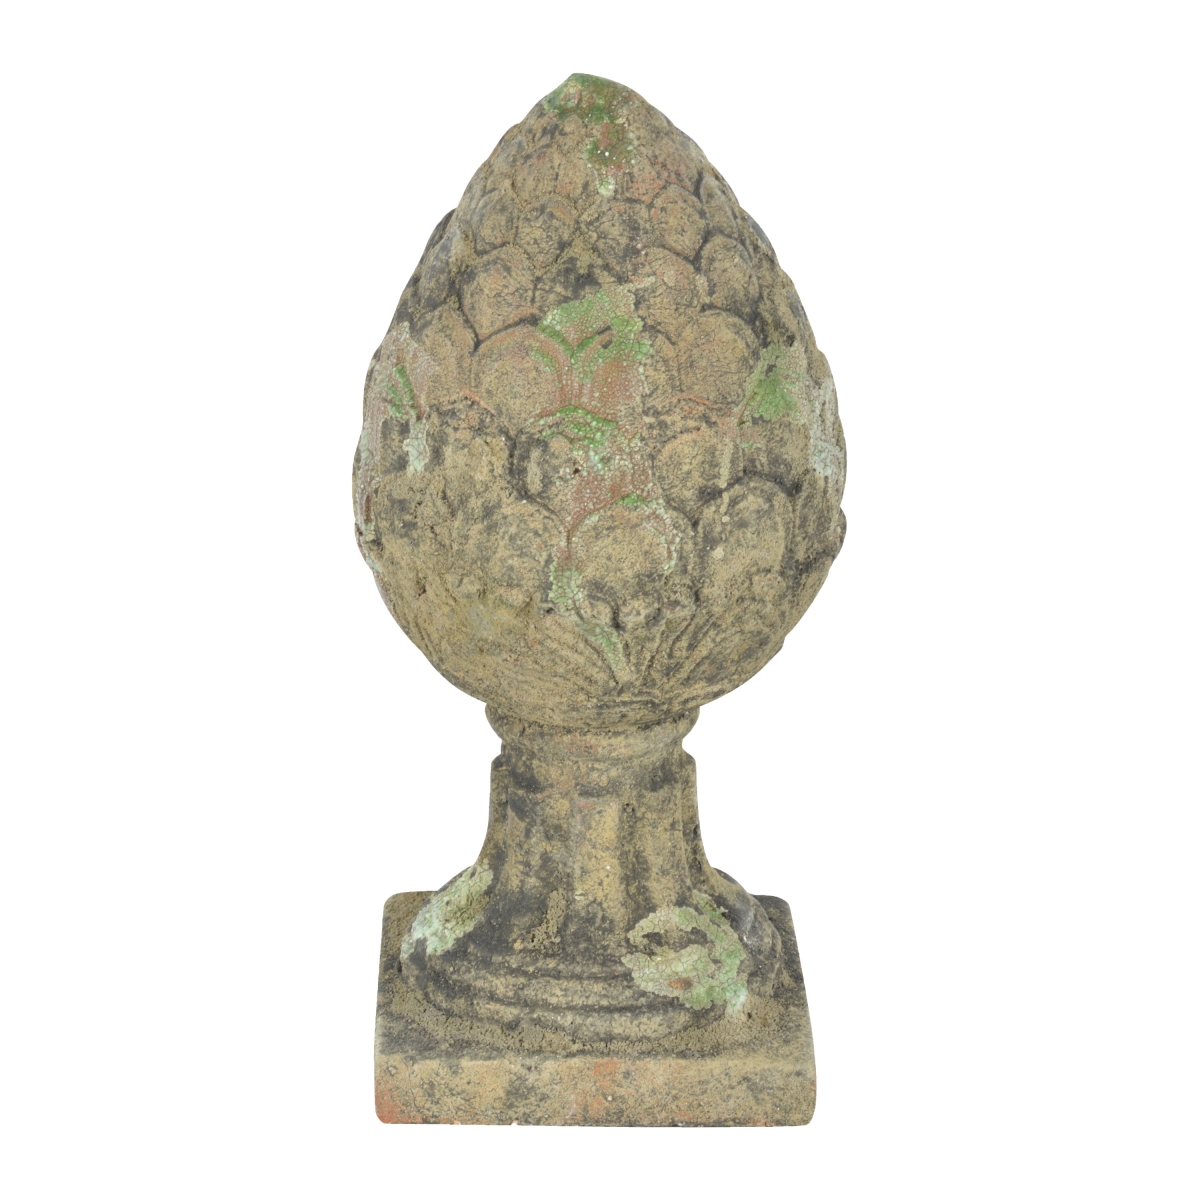 Ac145 Aged Ceramic Finial Pinecone Moss, Green - Large